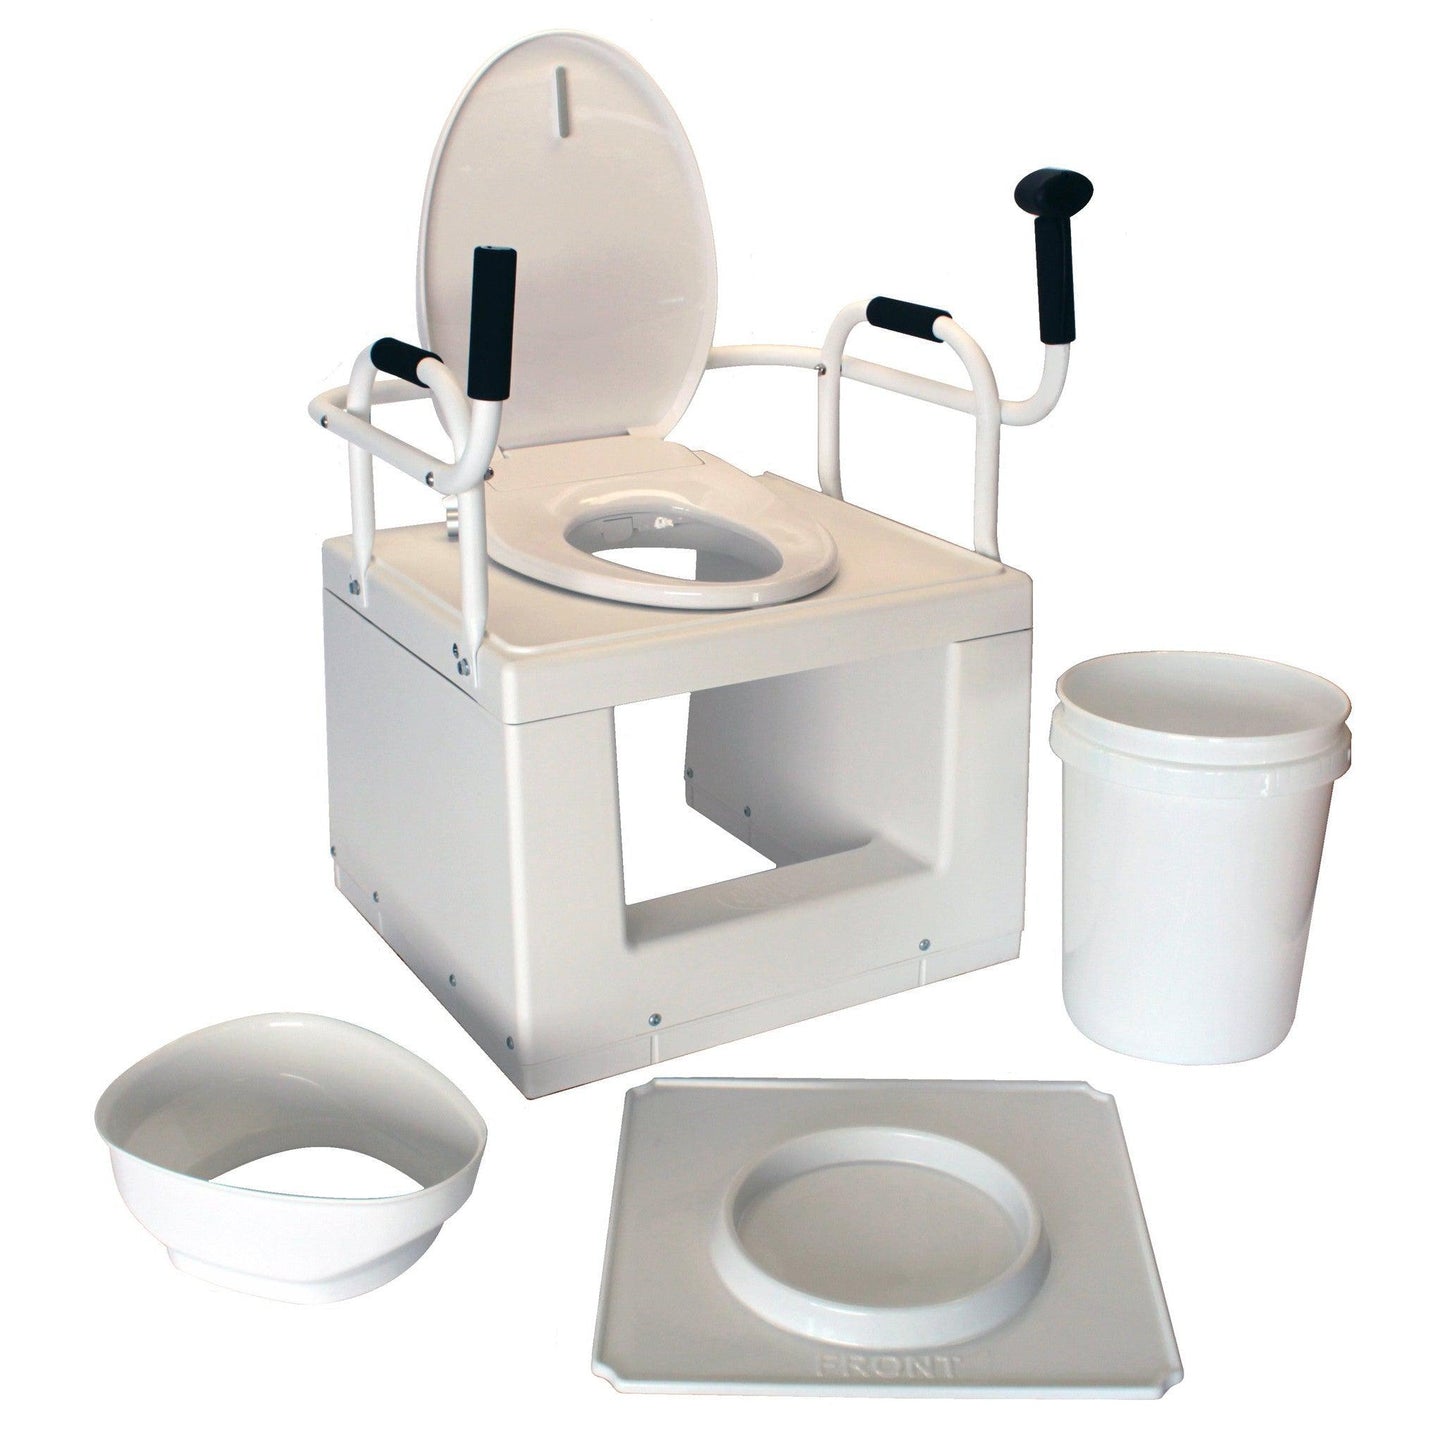 Throne Buttler 37" Powered Bedside Toilet Lift With 28" Wide Handle Bar, Upgraded Soft Close Toilet Seat and Commode Conversion Kit